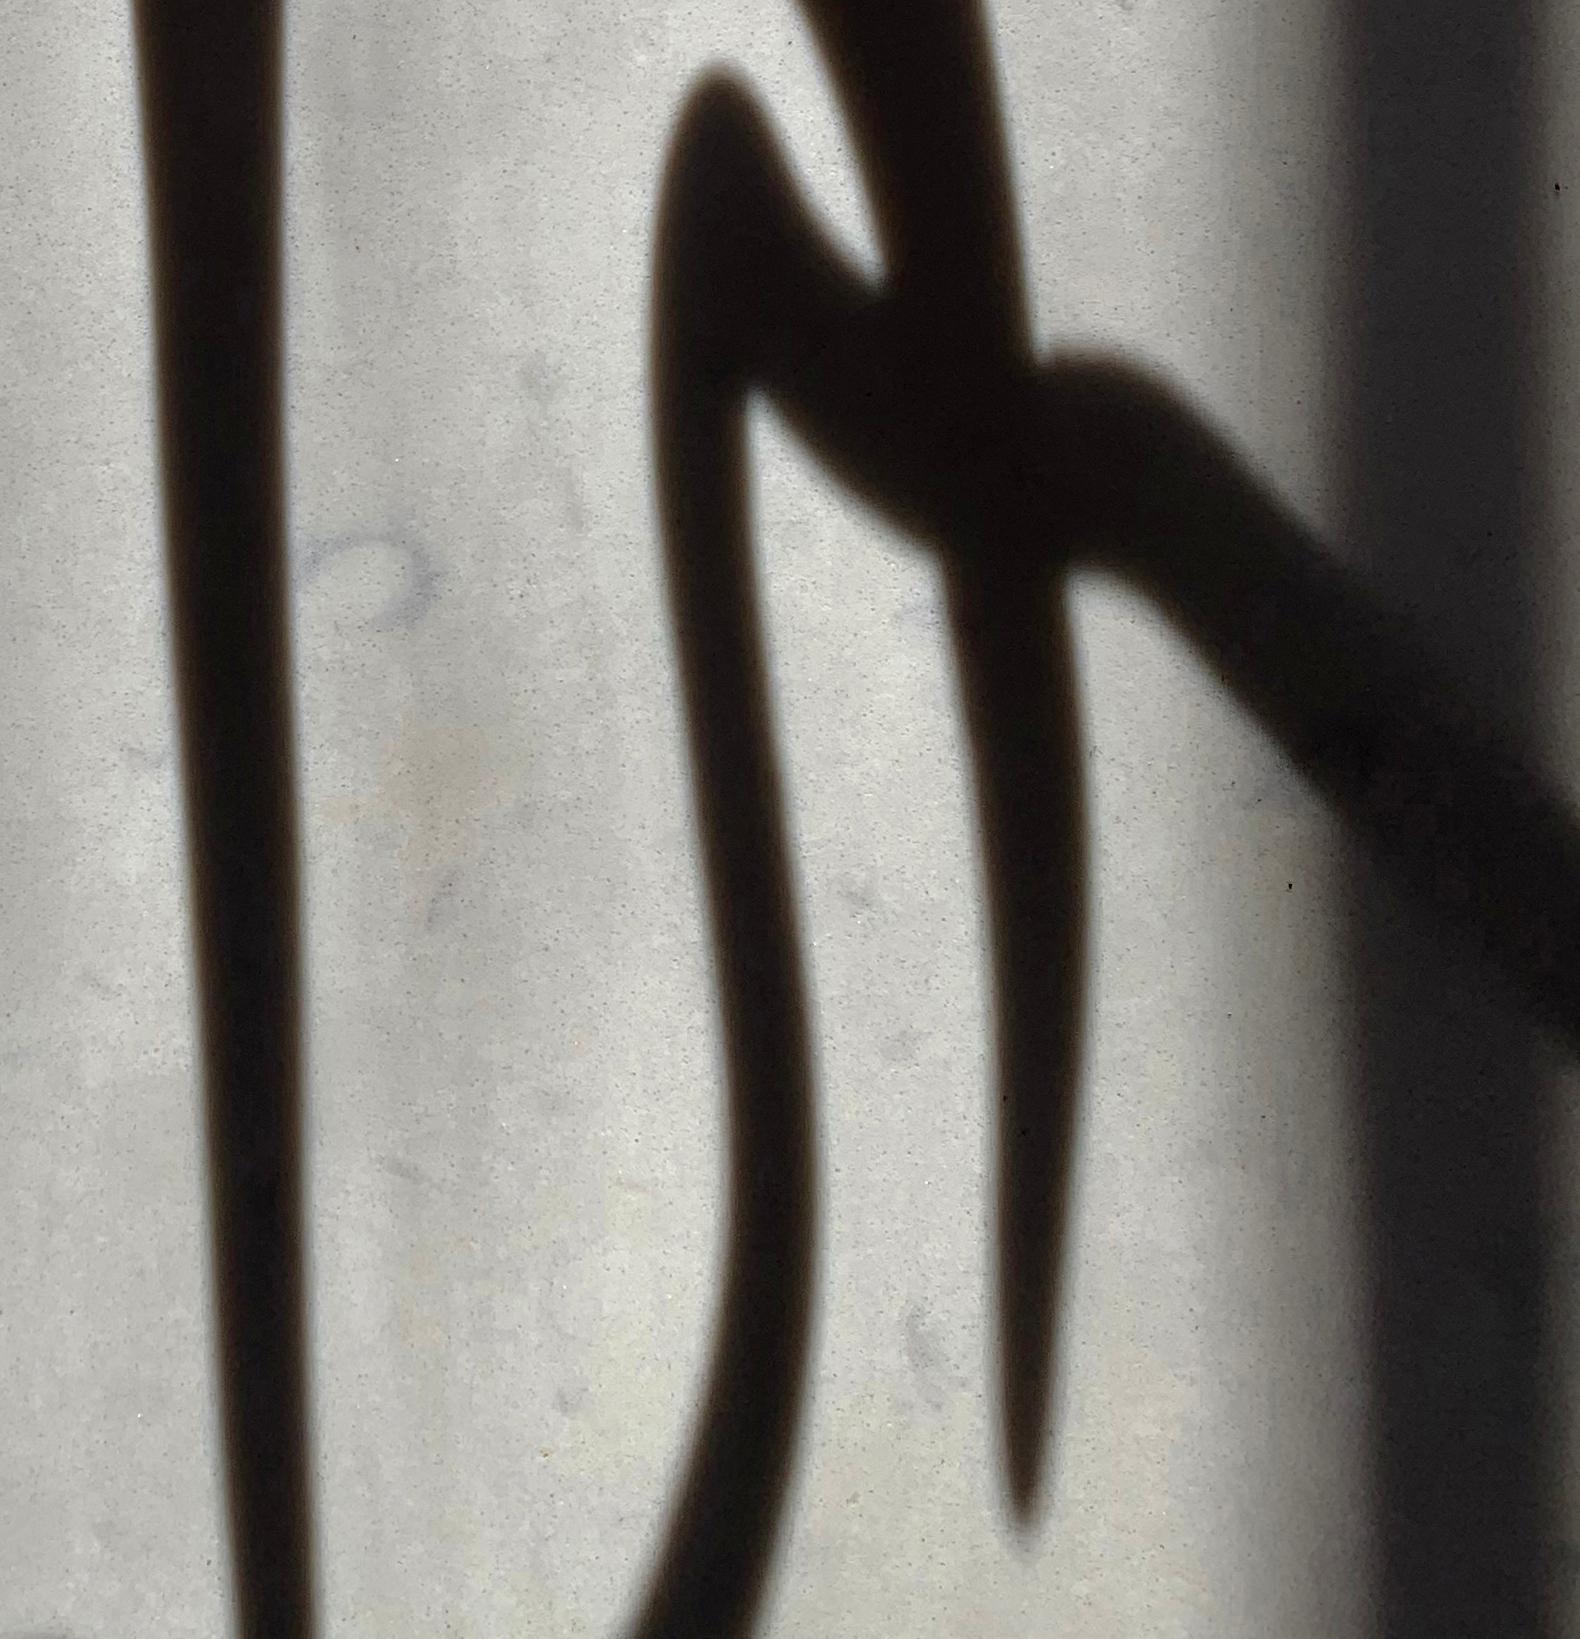 Untitled (2159): still life photograph with antler and abstract shadow patterns - Abstract Photograph by Paul Cava